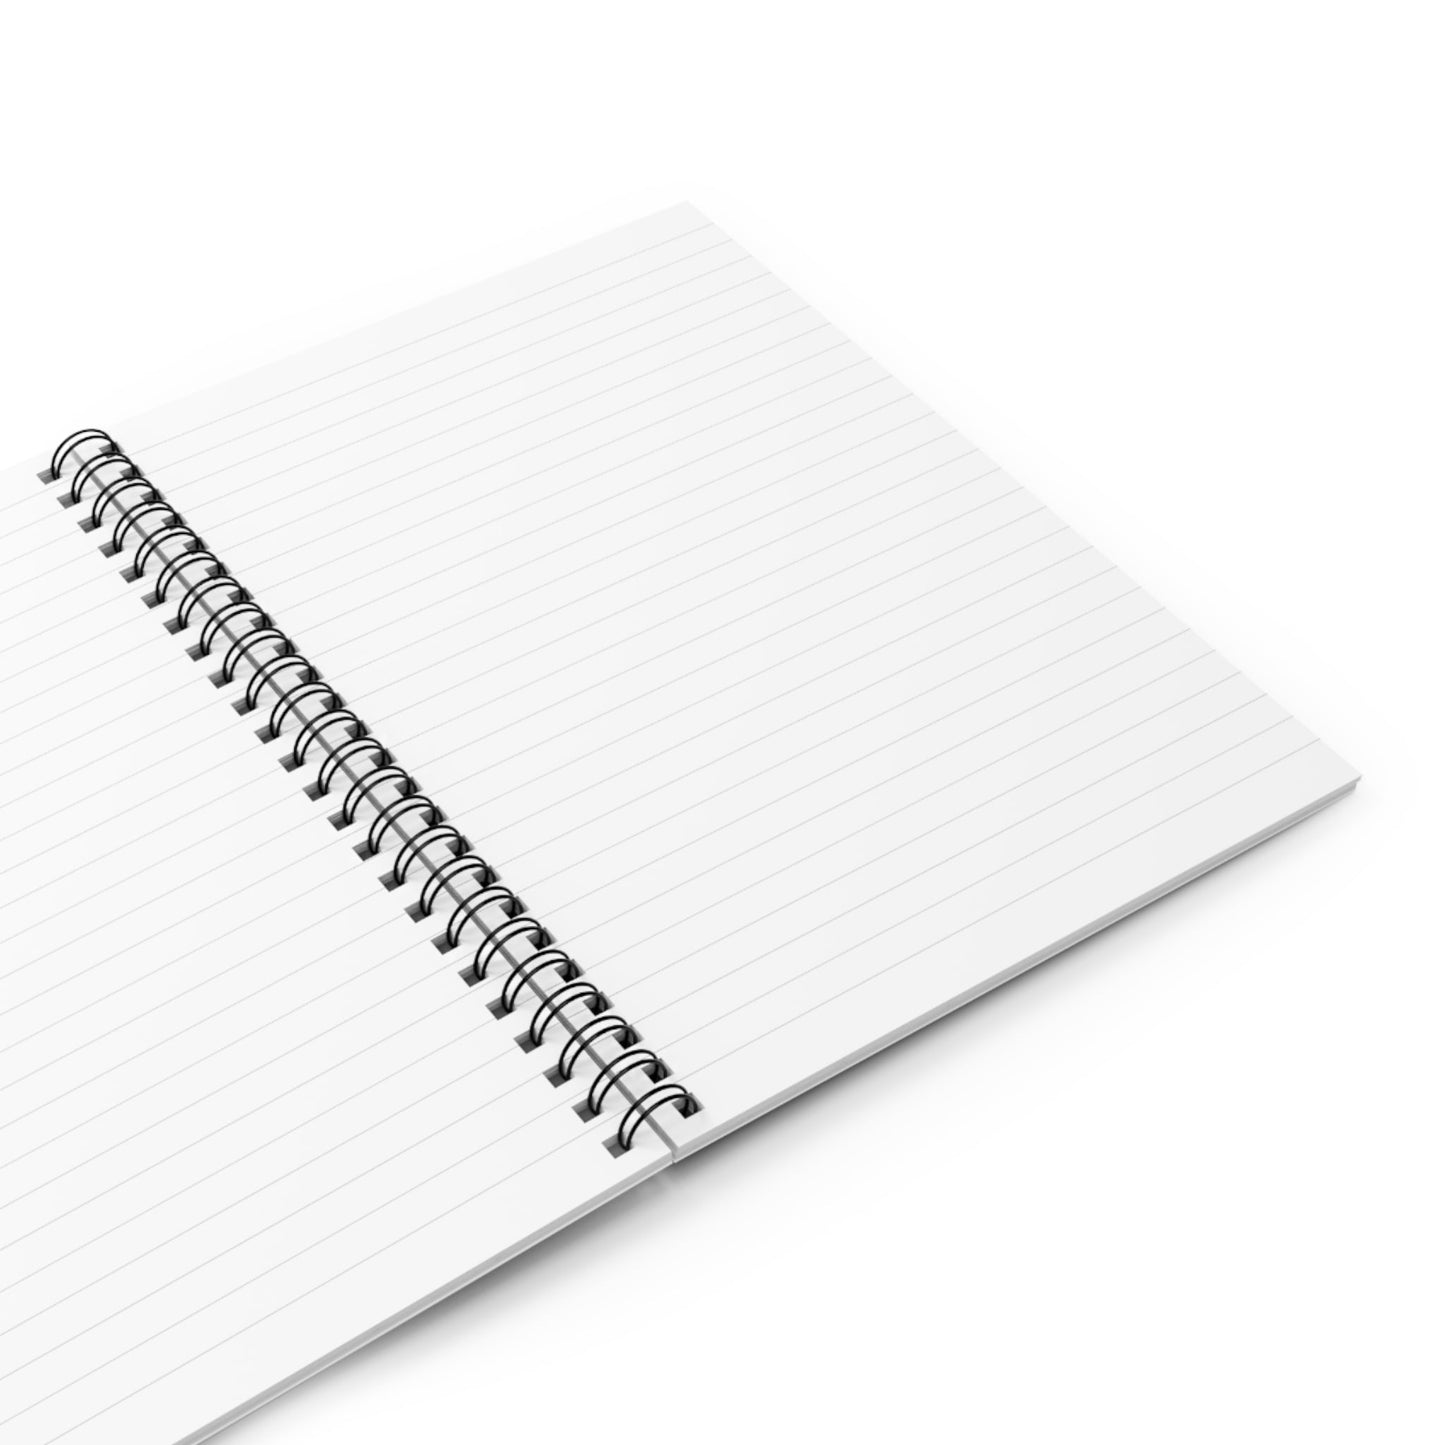 Spiral Notebook with Black and White Moody Cover Opened with Blank White College Ruled Pages